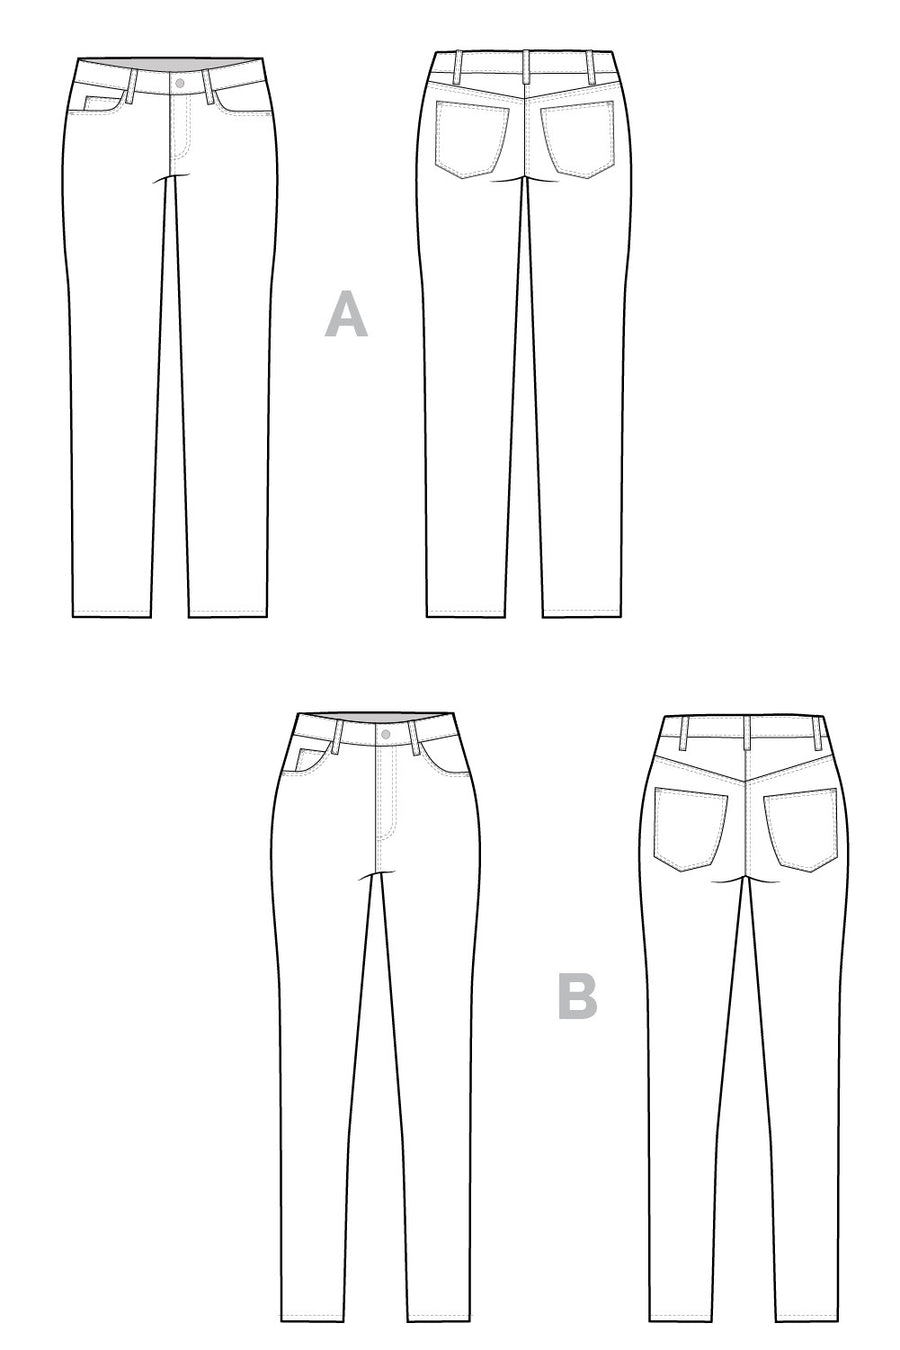 Ginger Skinny Jeans pattern // Technical flats // Closet Core Patterns